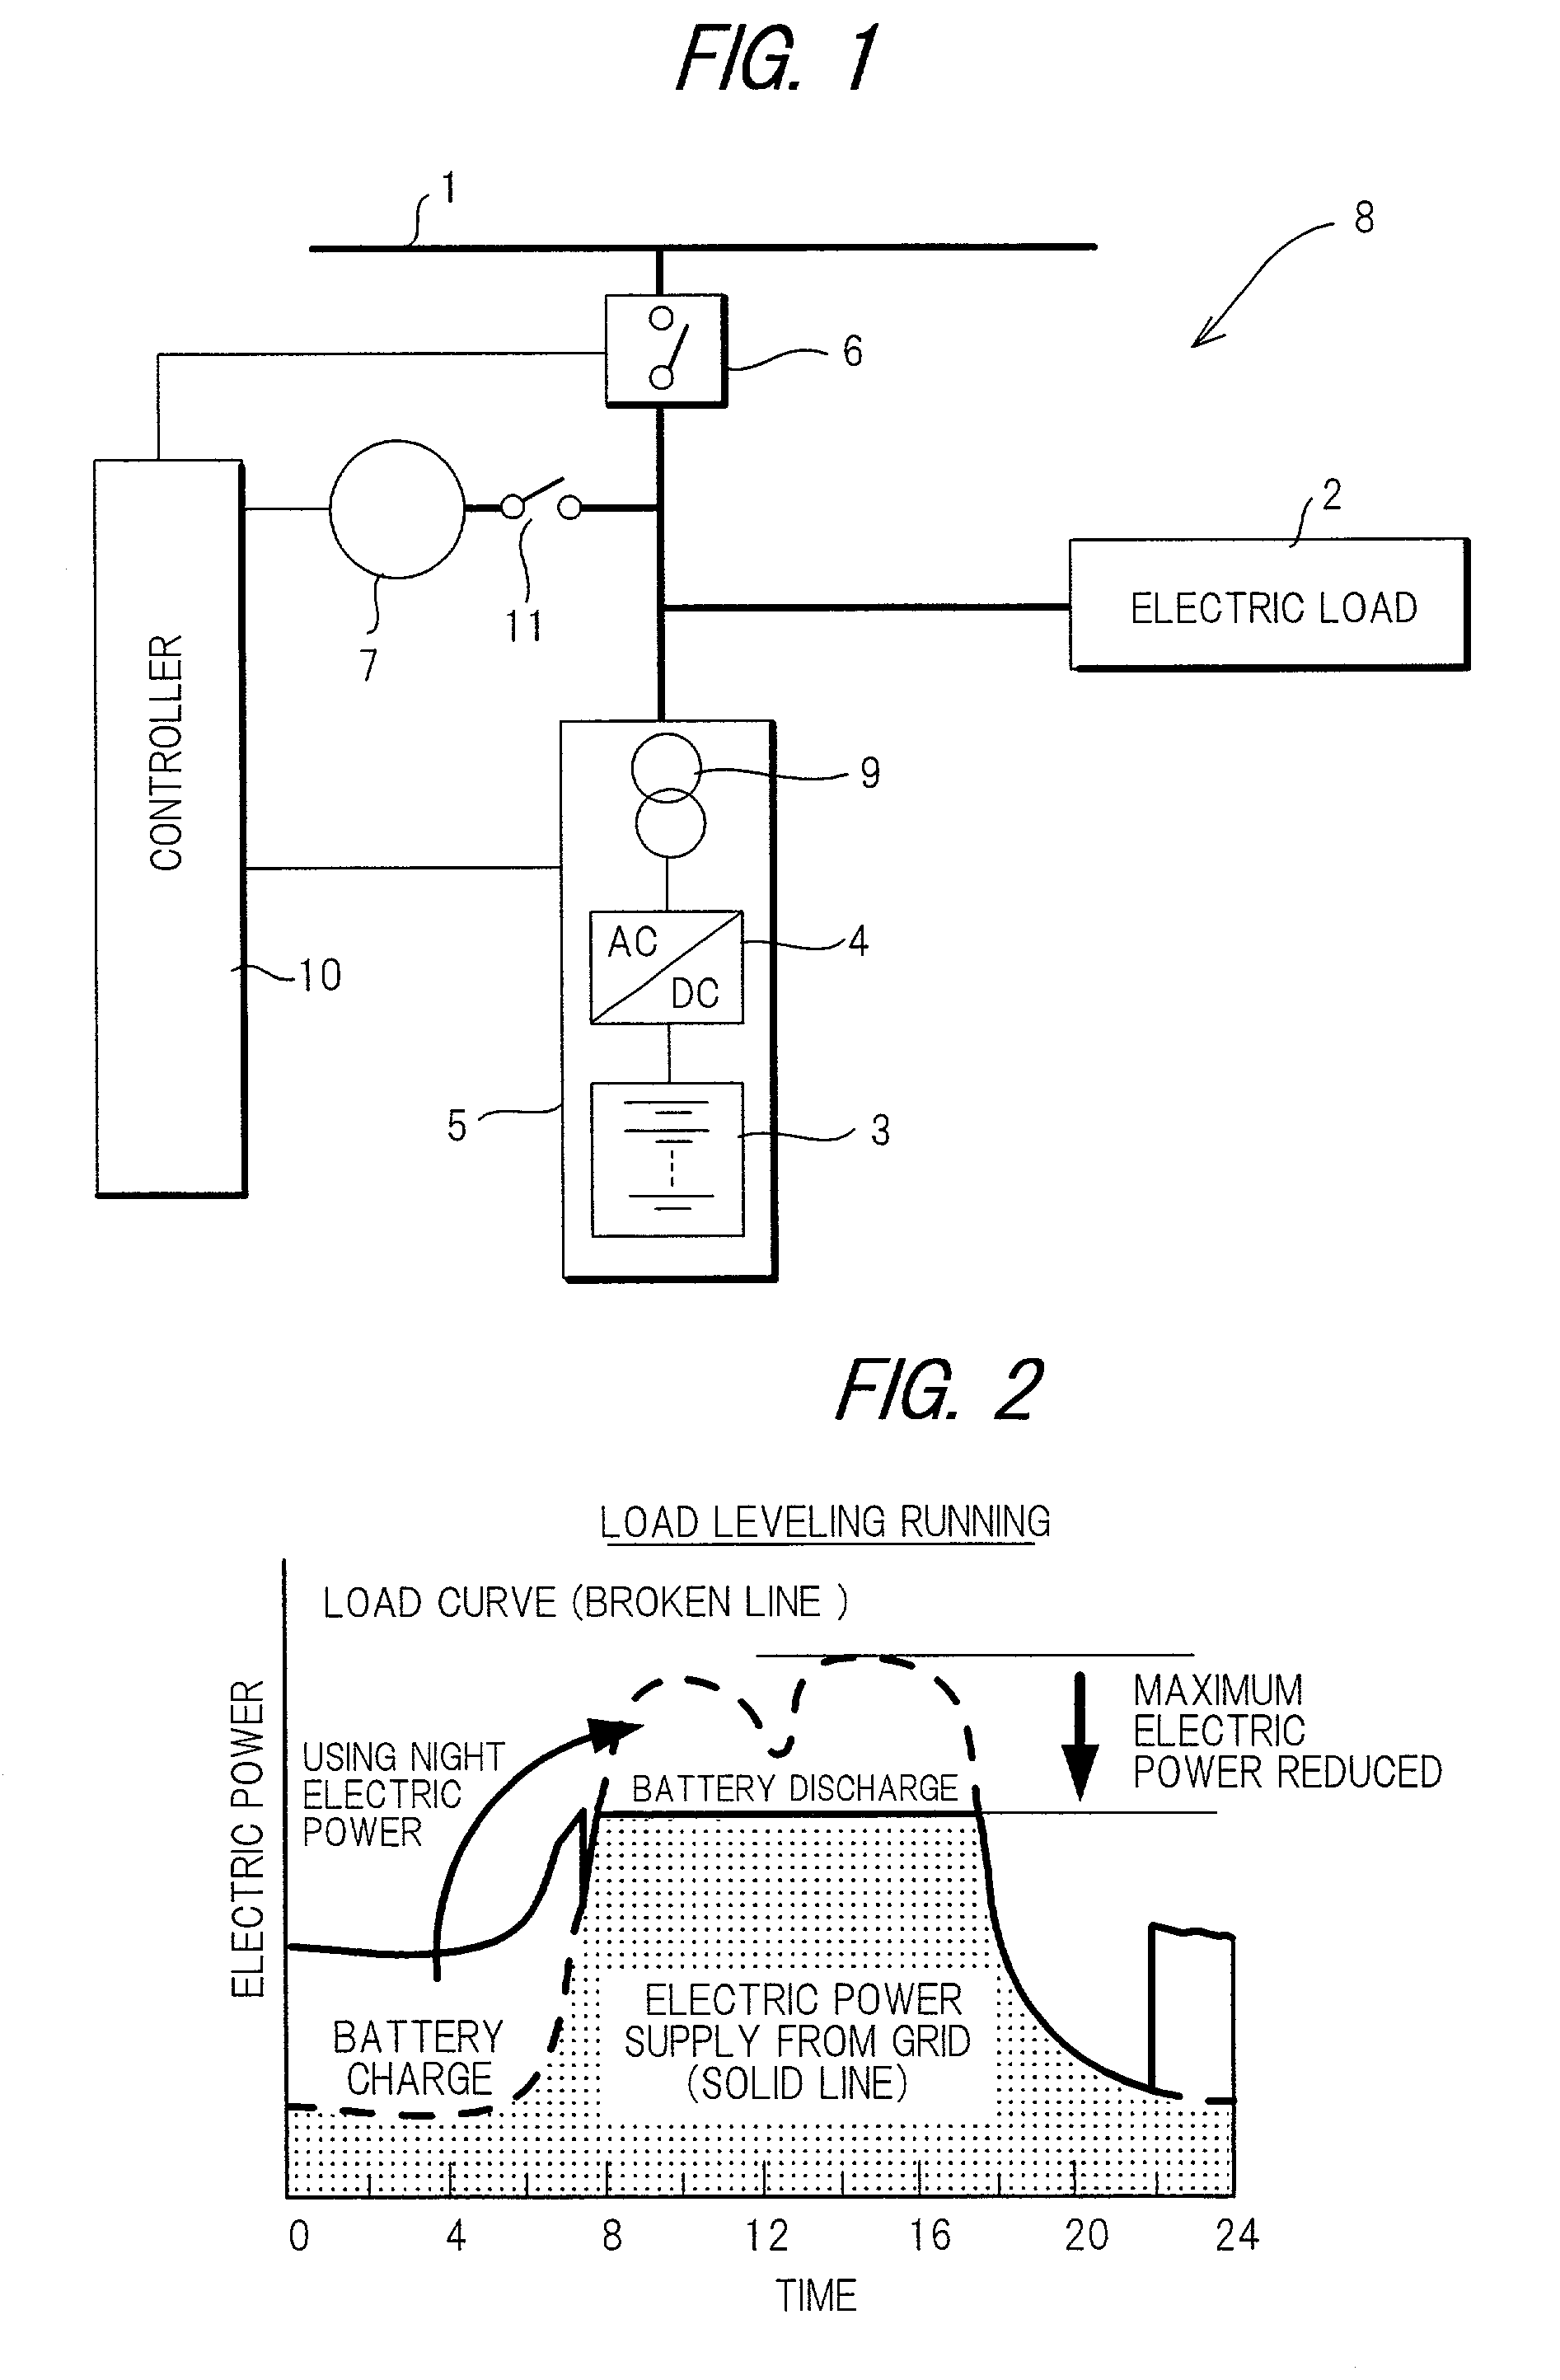 High-temperature secondary battery based energy storage and power compensation system